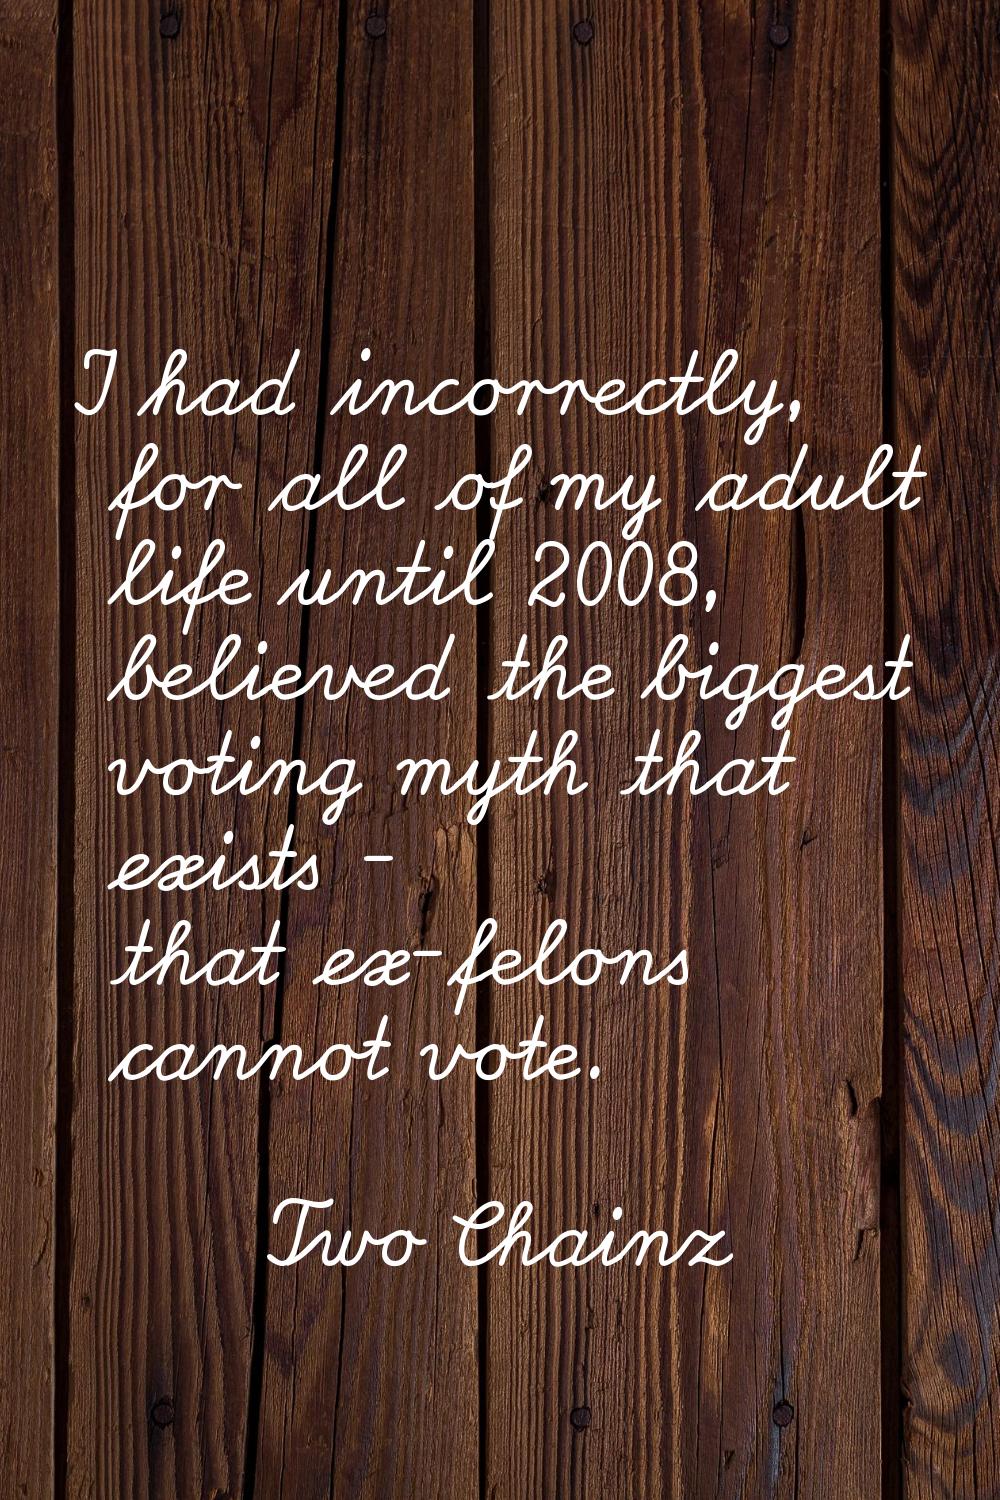 I had incorrectly, for all of my adult life until 2008, believed the biggest voting myth that exist